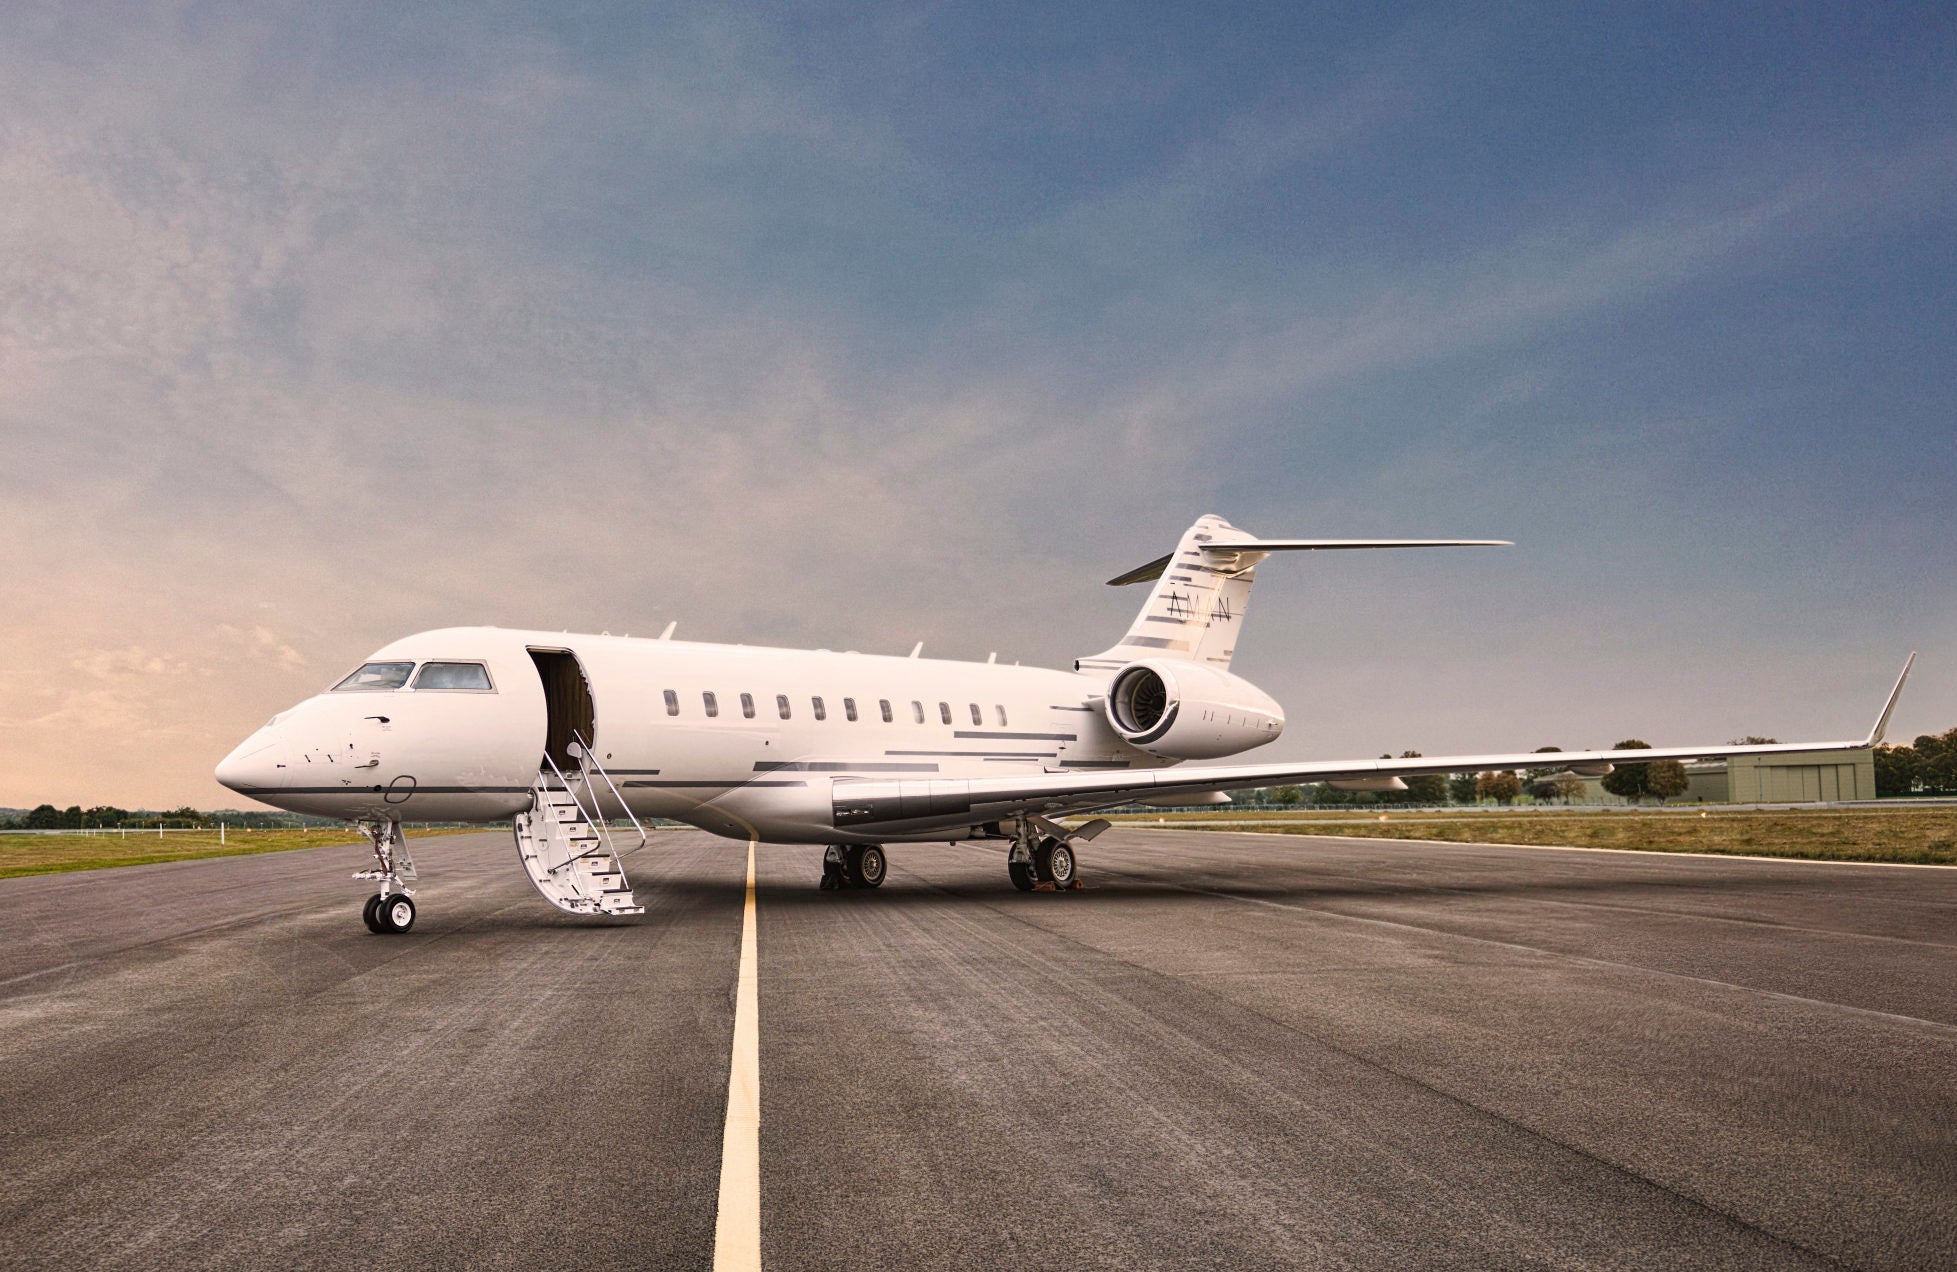 Travel the World on the Stunning Aman Private Jet